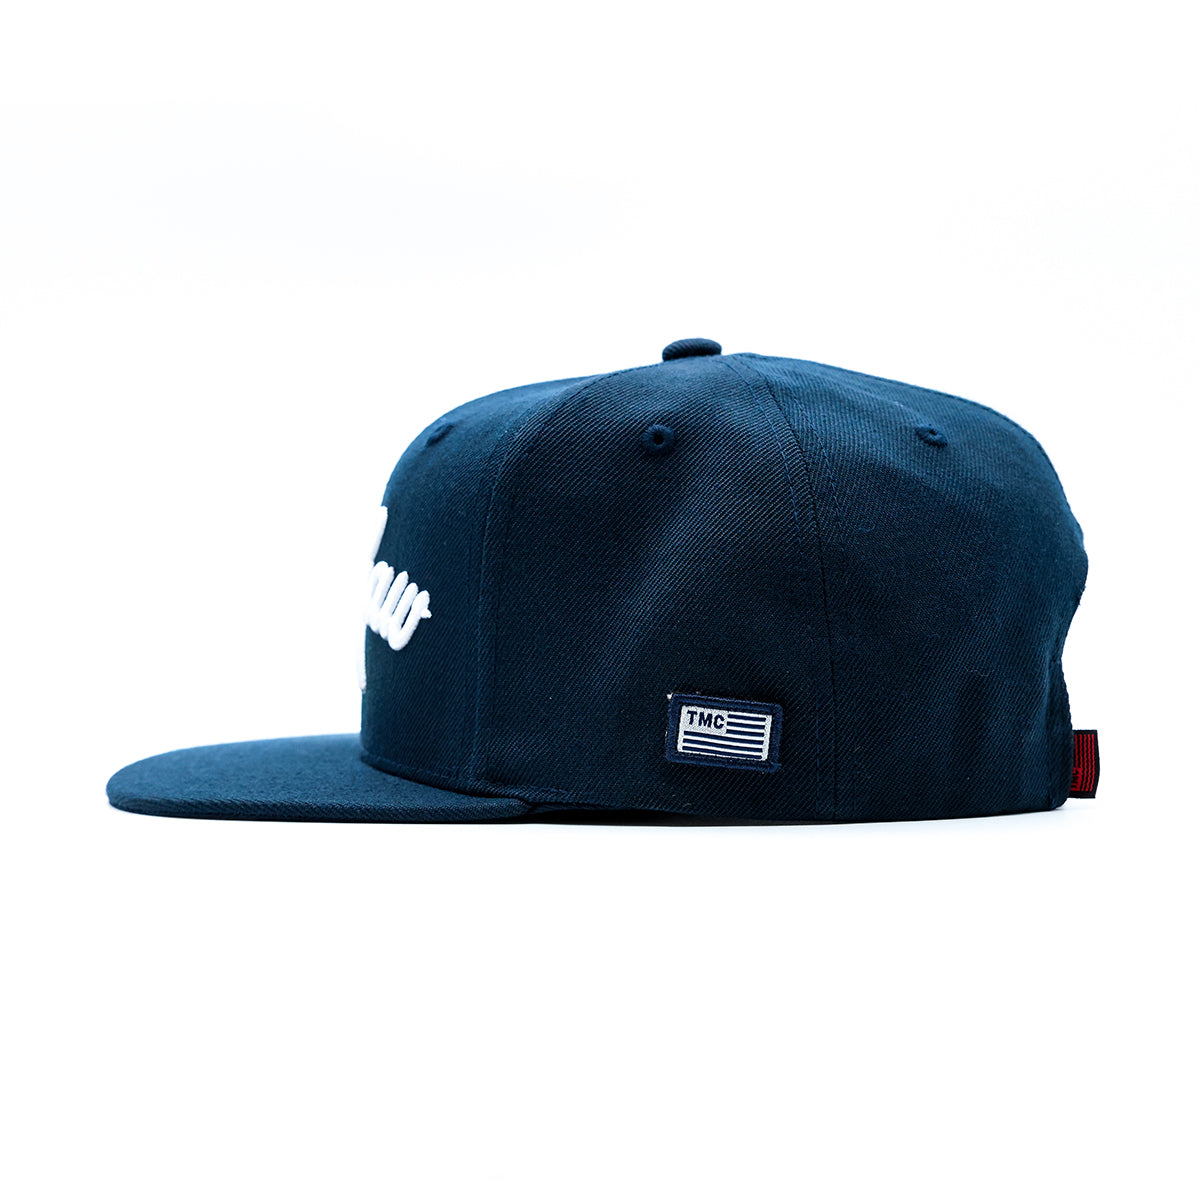 Crenshaw Limited Edition Snapback - Navy/White - Side